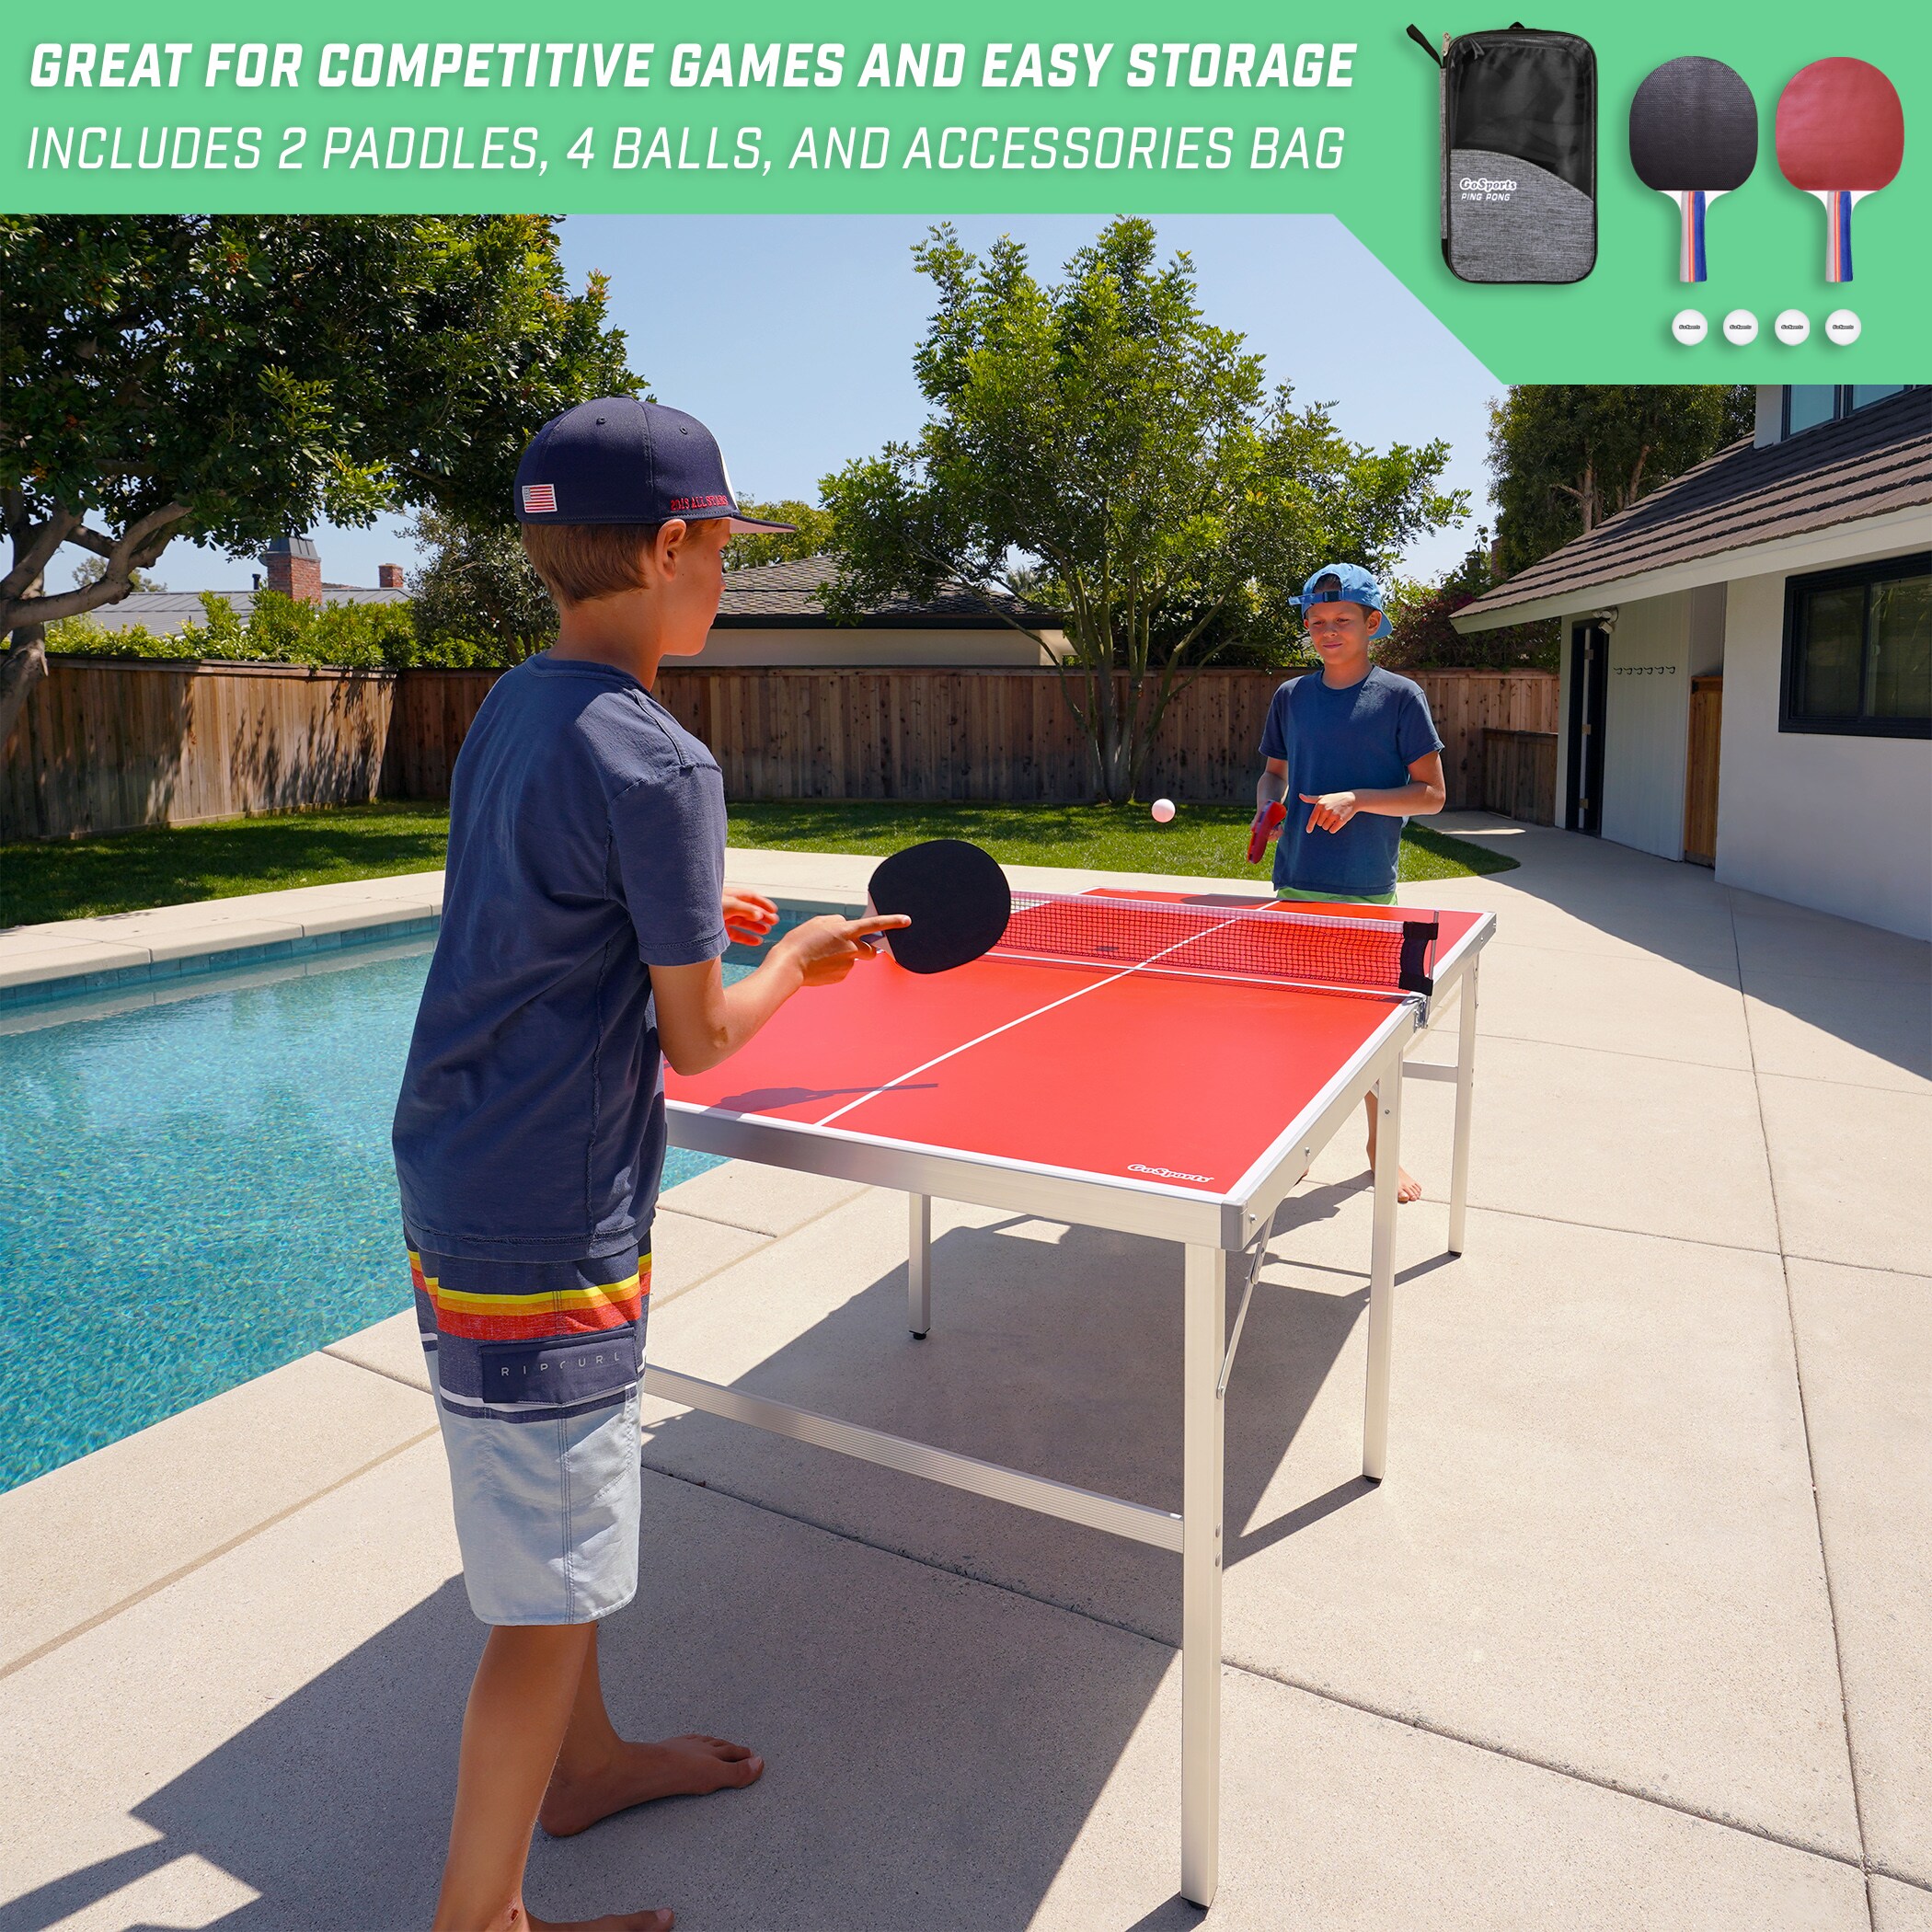 Tennis Table Outdoor Ping Pong Official Size Paddle Balls Kids Sports Game Fun 